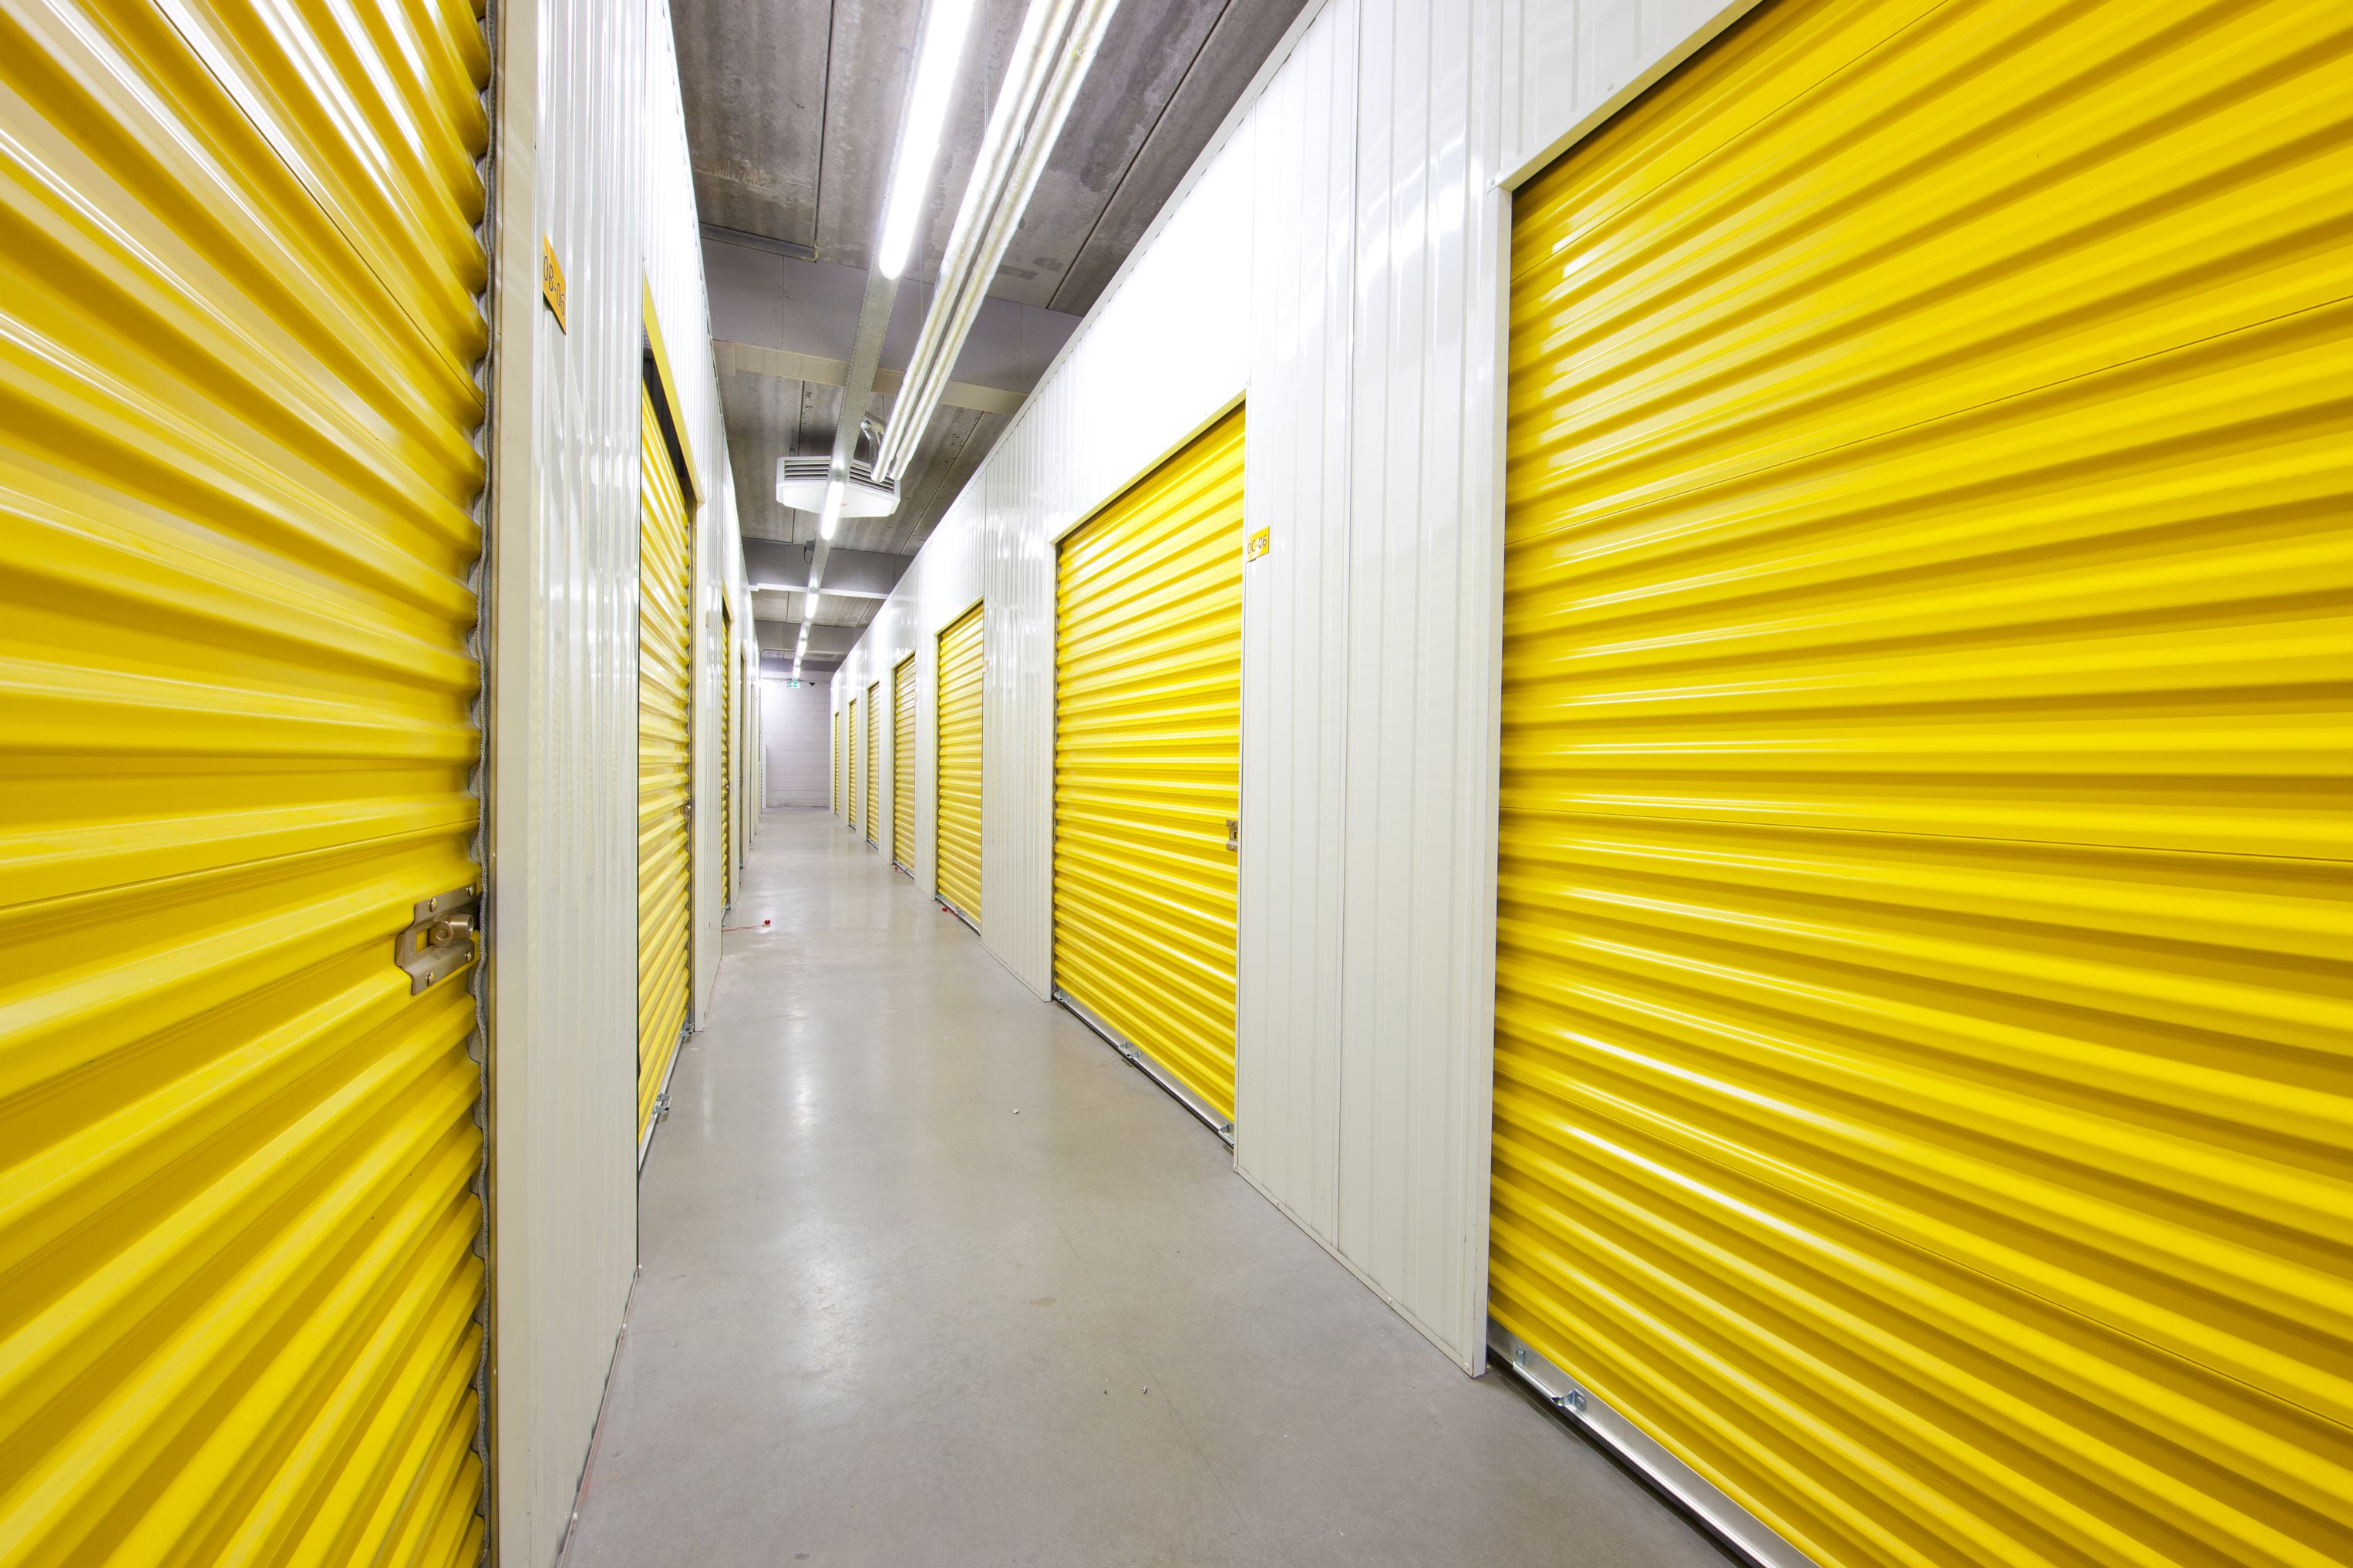 How Can You Select The Best Storage Solution For Your Requirements